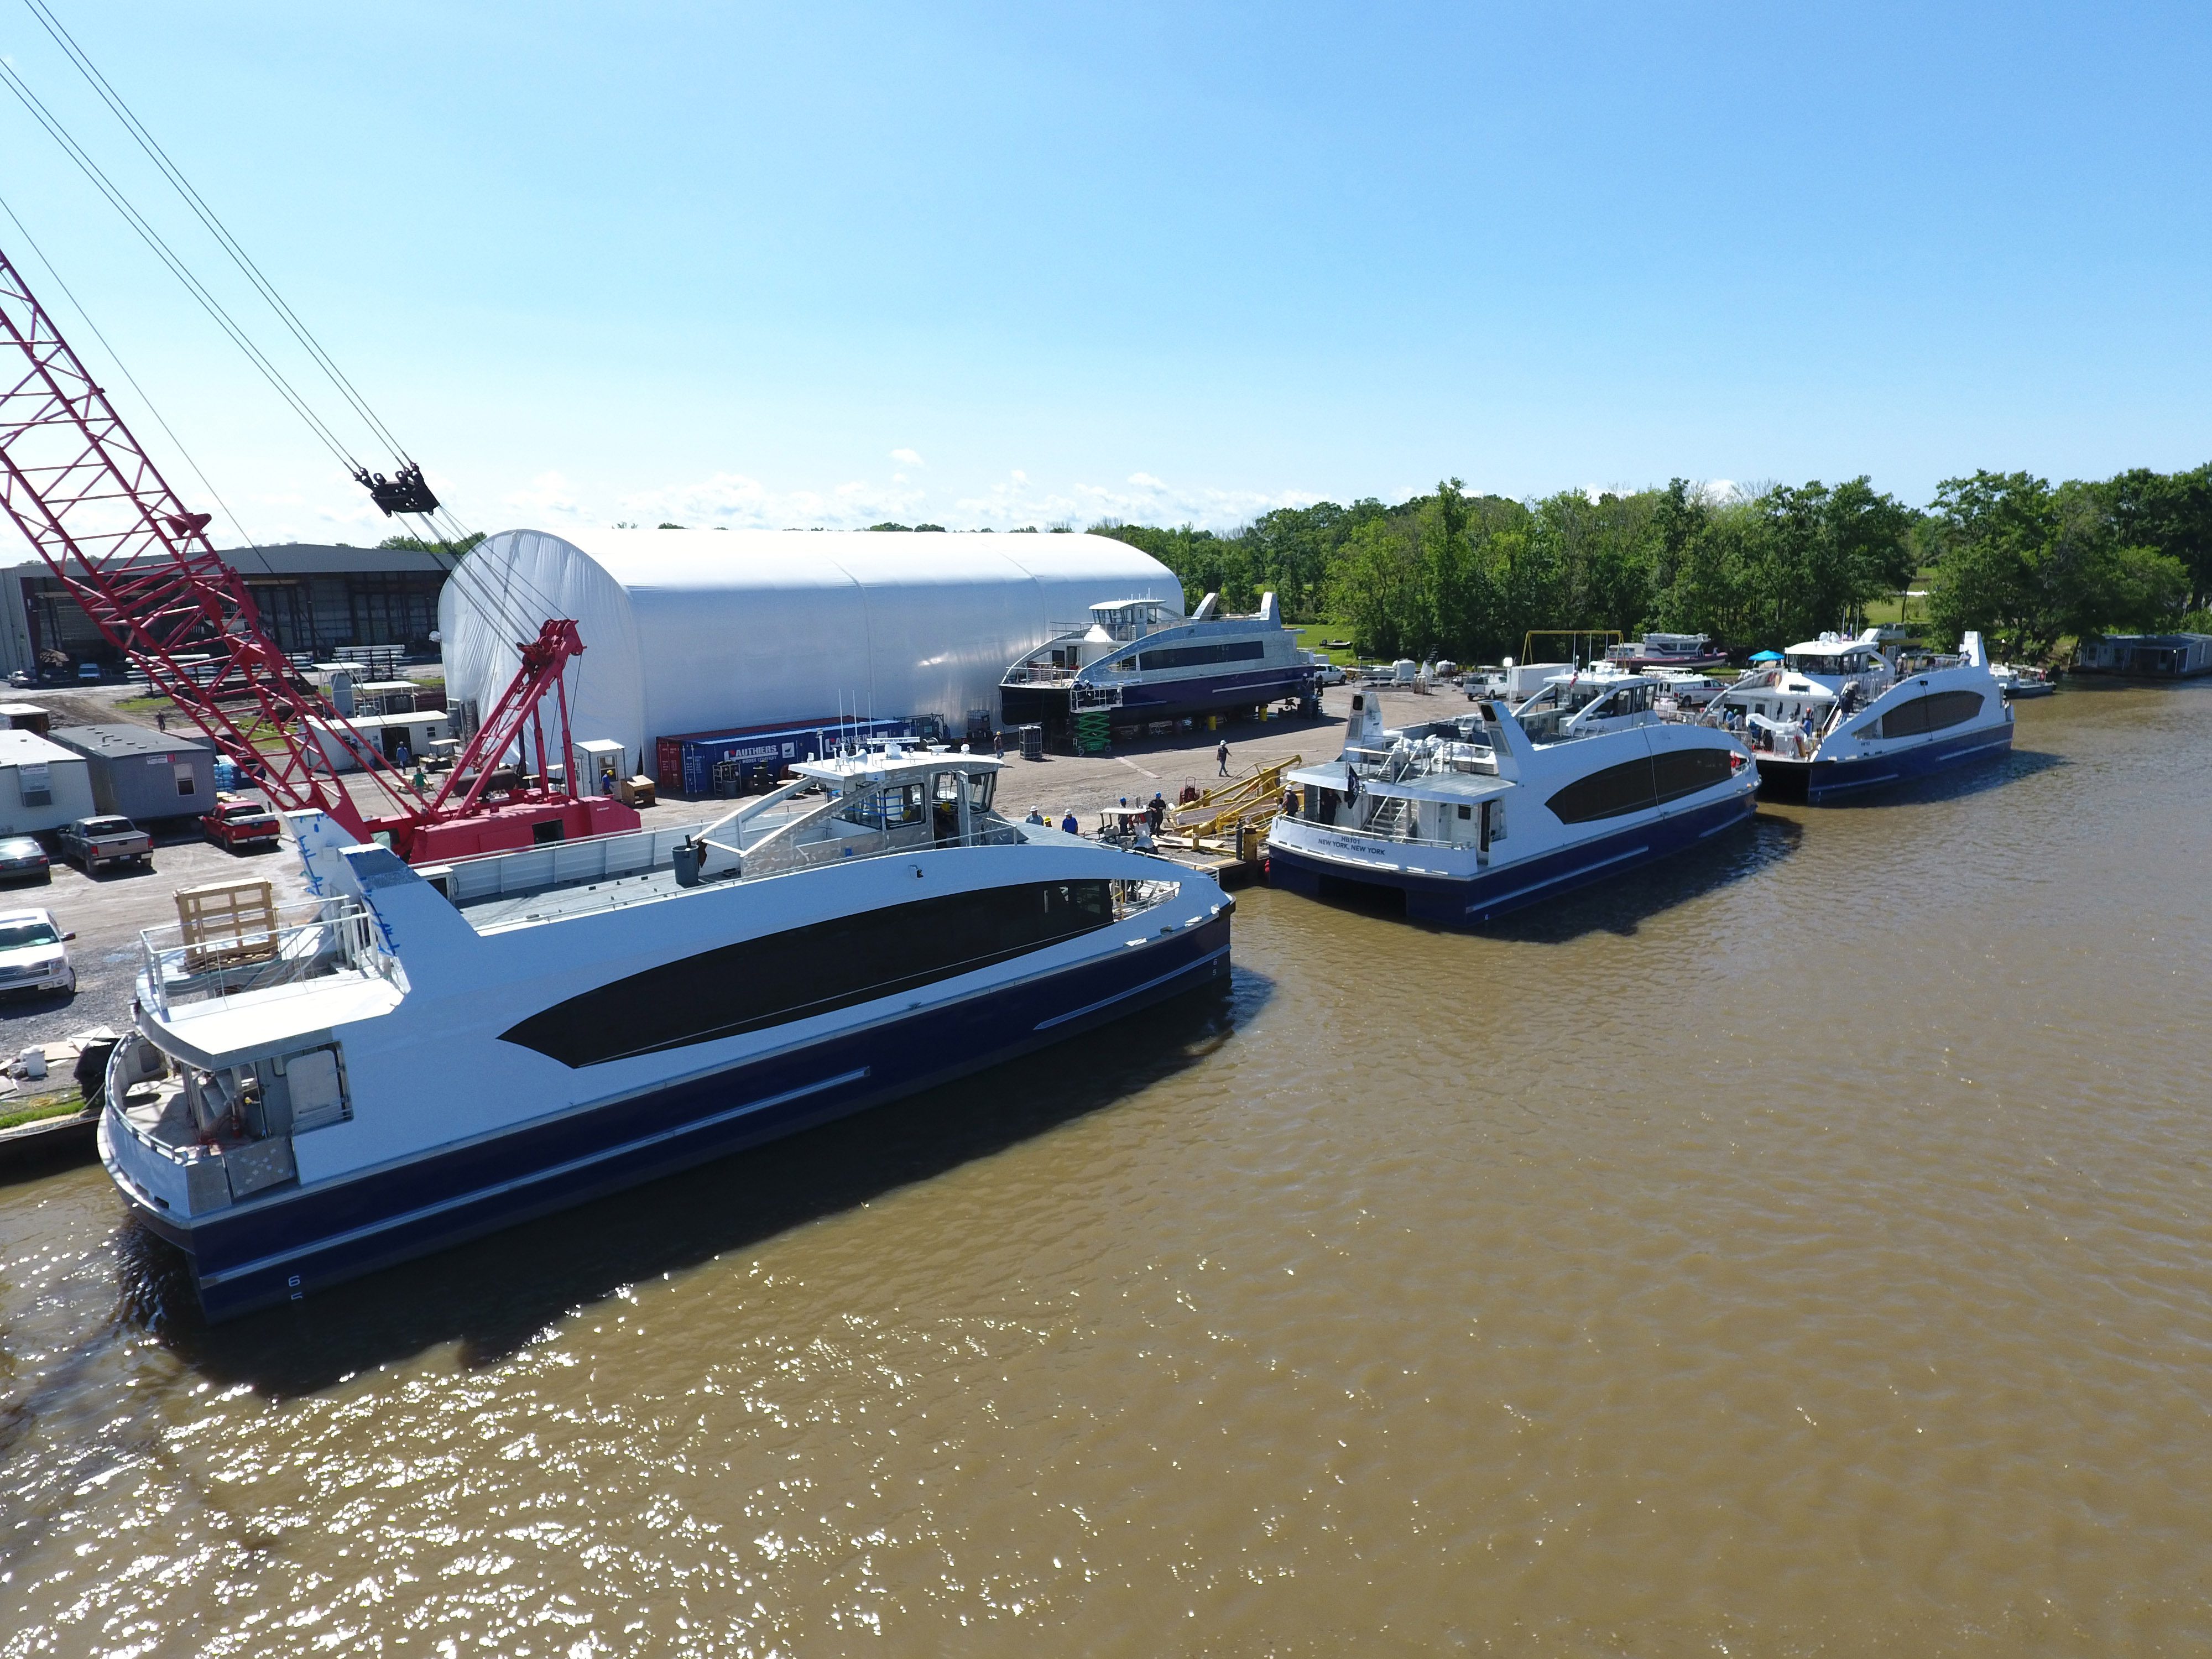 Metal Shark Building Four 350-Passenger Vessels and an Additional 150-Passenger Vessel for NYC Ferry